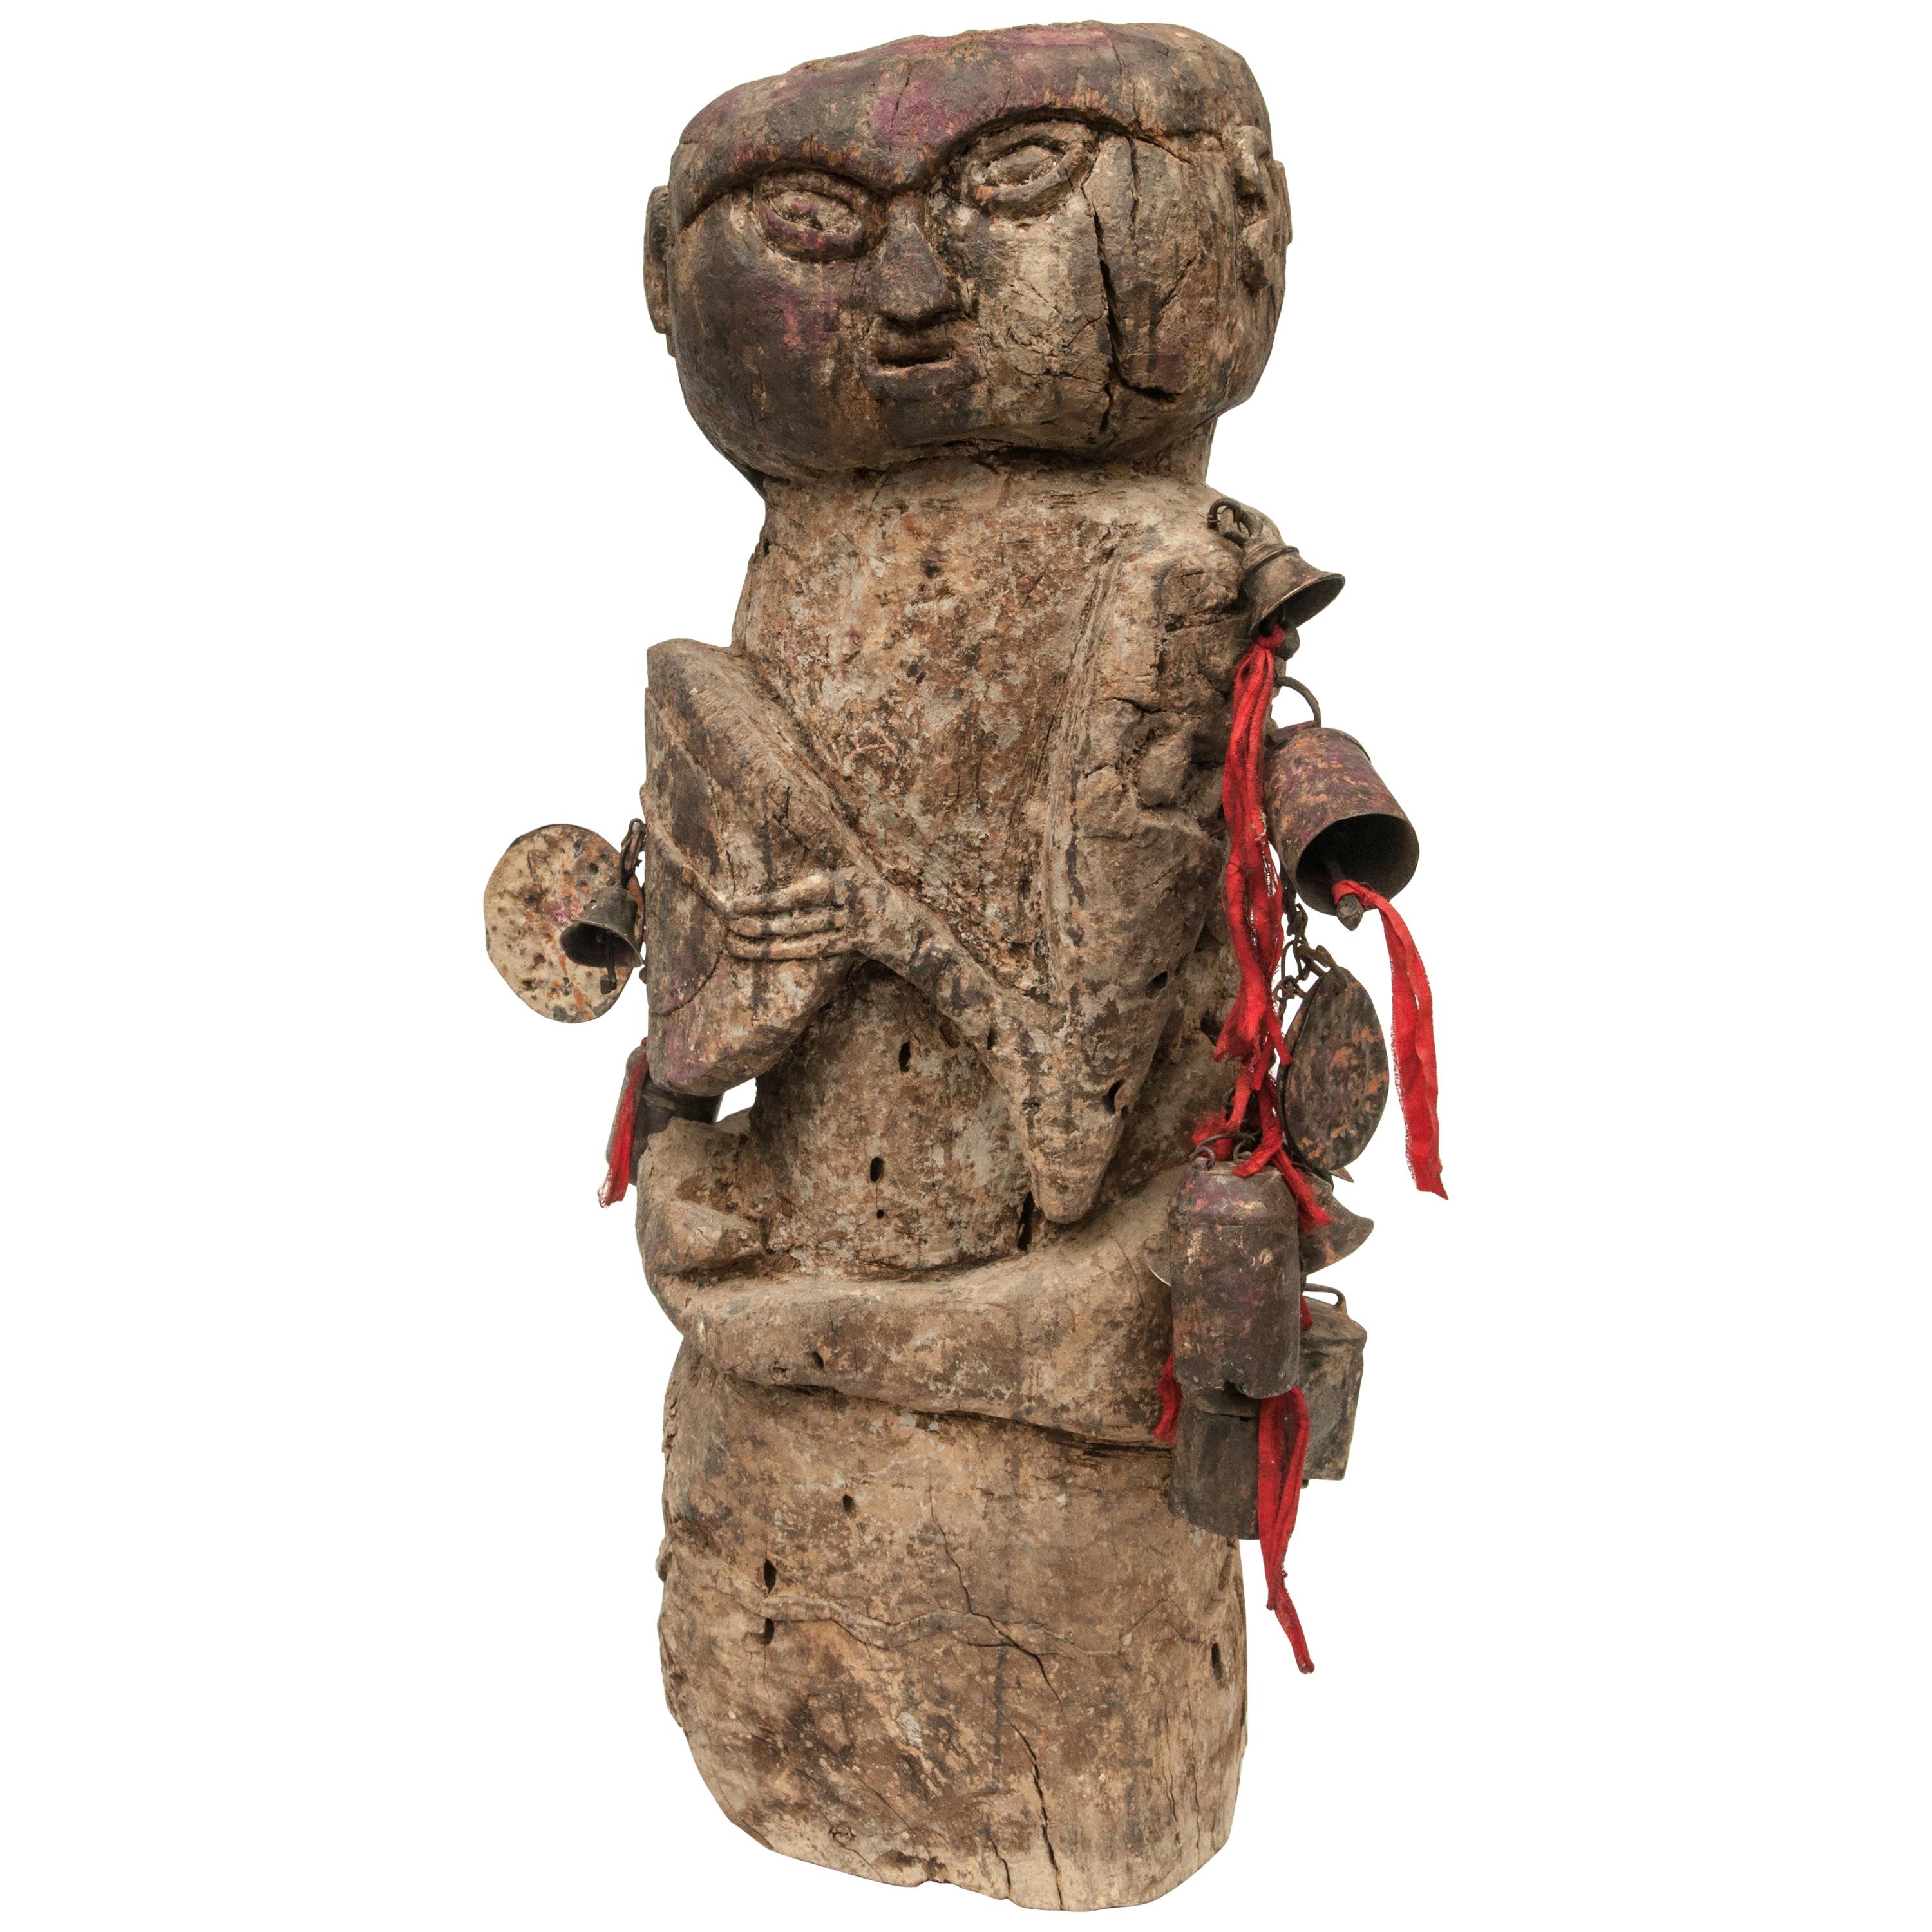 Tribal Shaman Figure from West Central Nepal, Early to Mid-20th Century